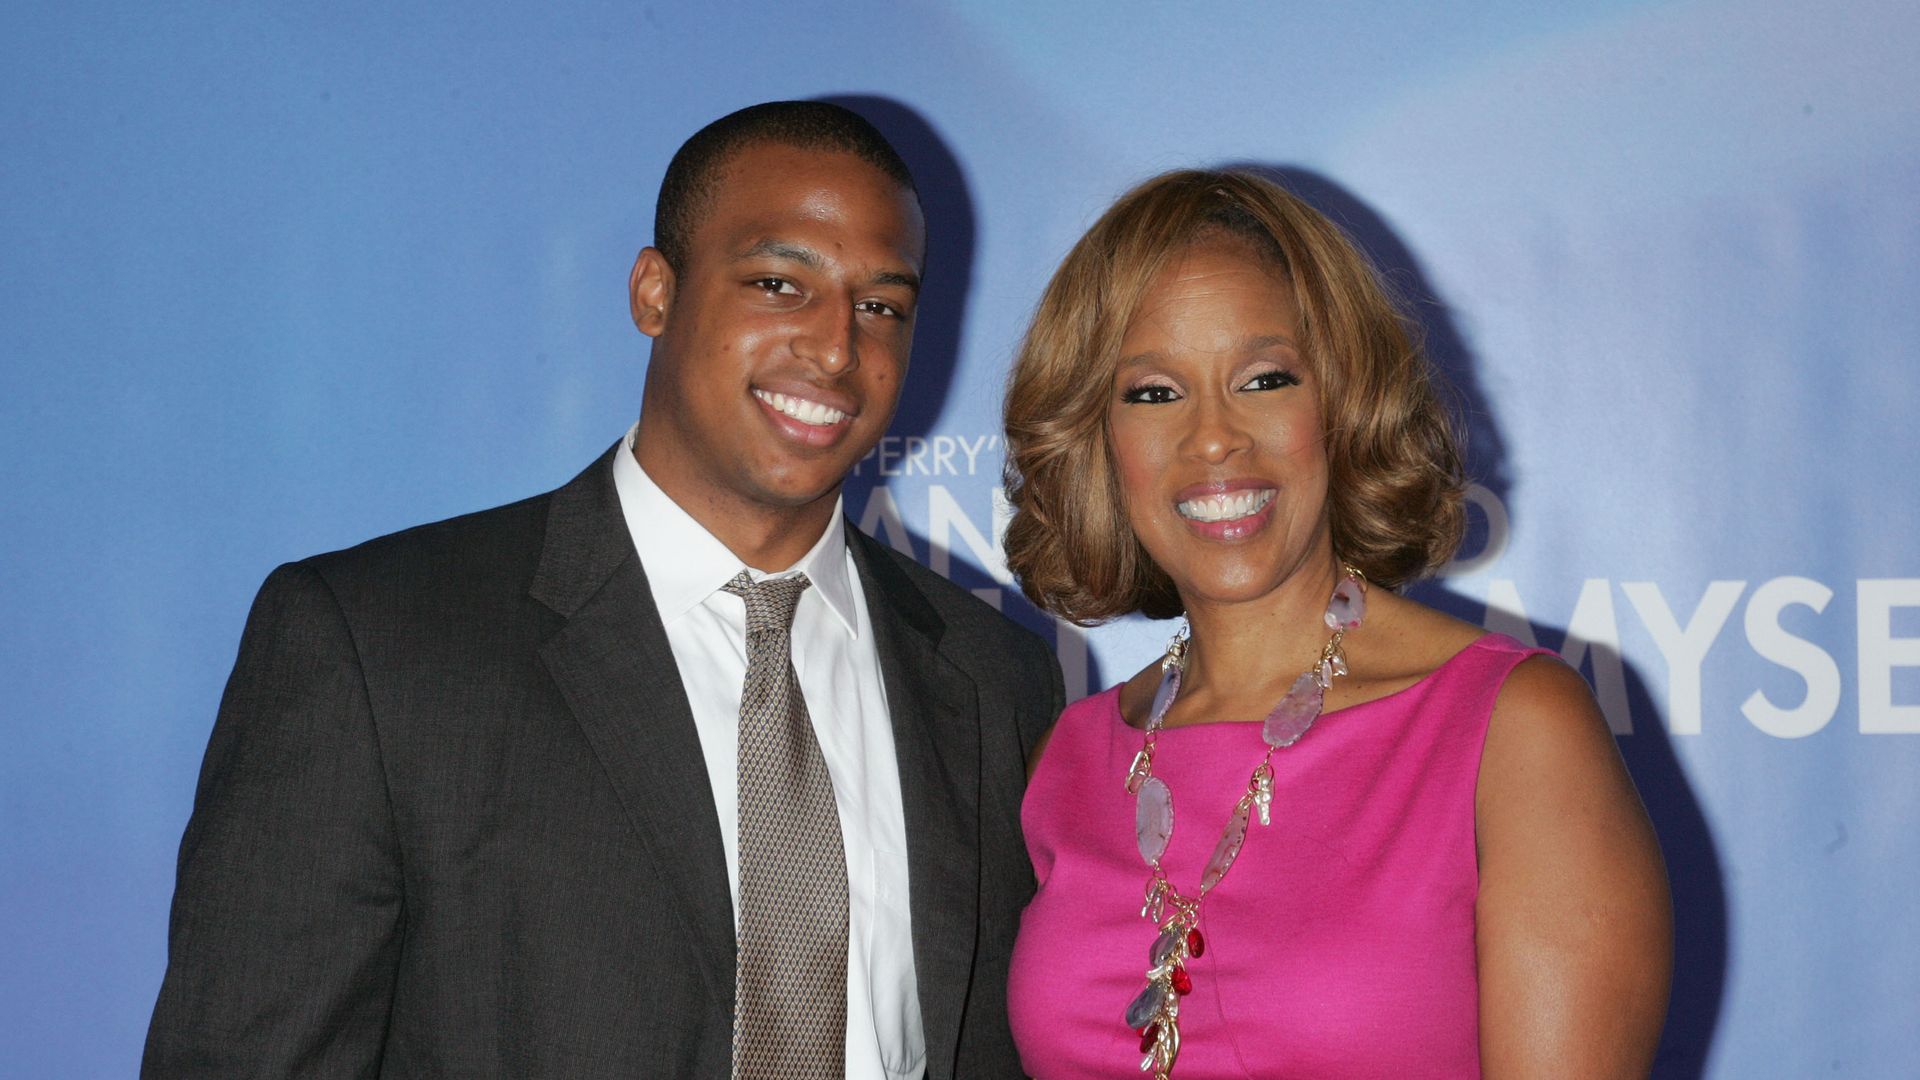 Gayle King's handsome 'favorite' son gets married at Oprah Winfrey's mansion — see photos